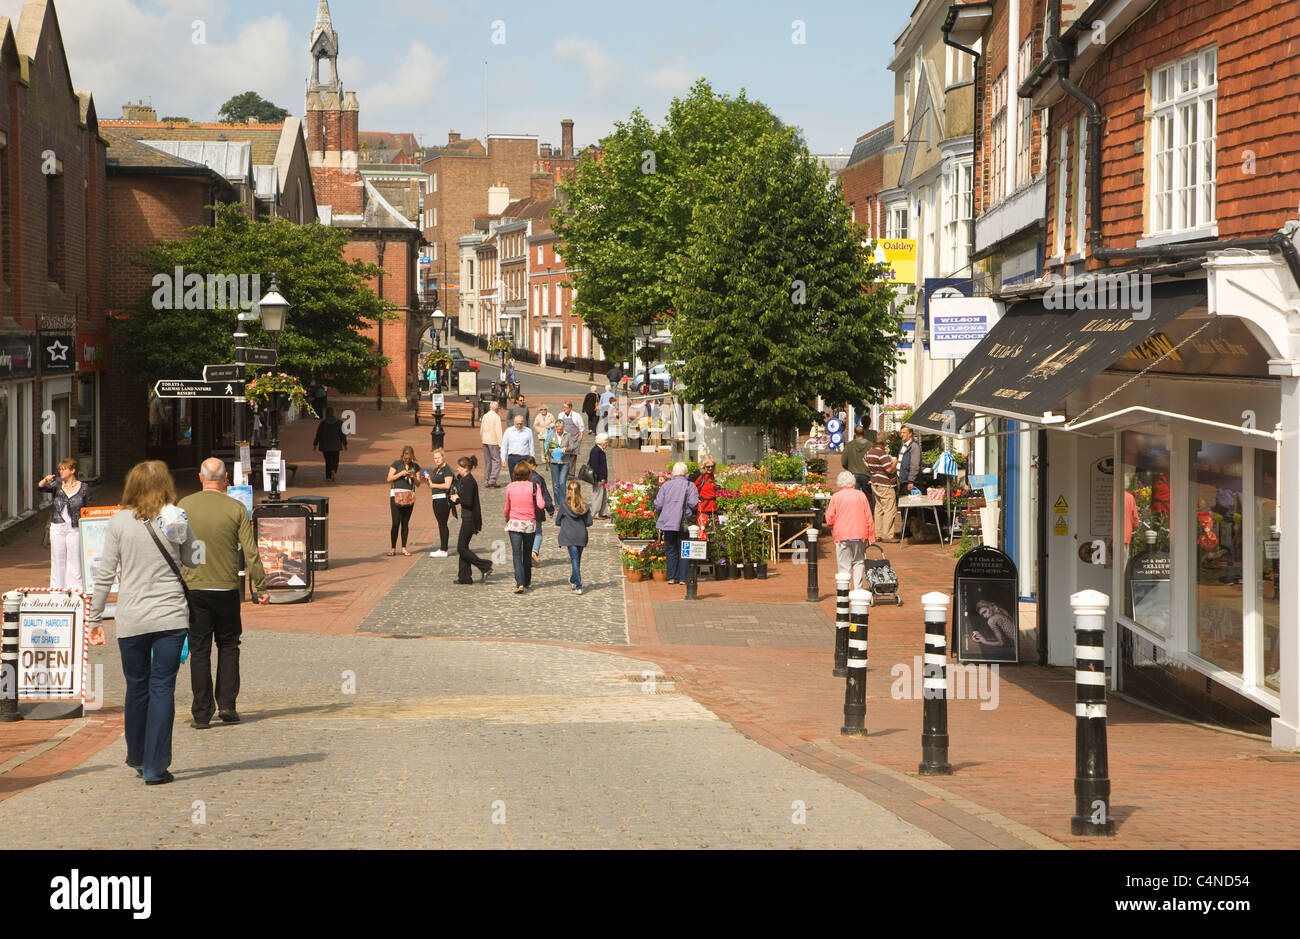 Pedestrian shoppers Cliffe High Street, Lewes, East Sussex, England Stock Photo